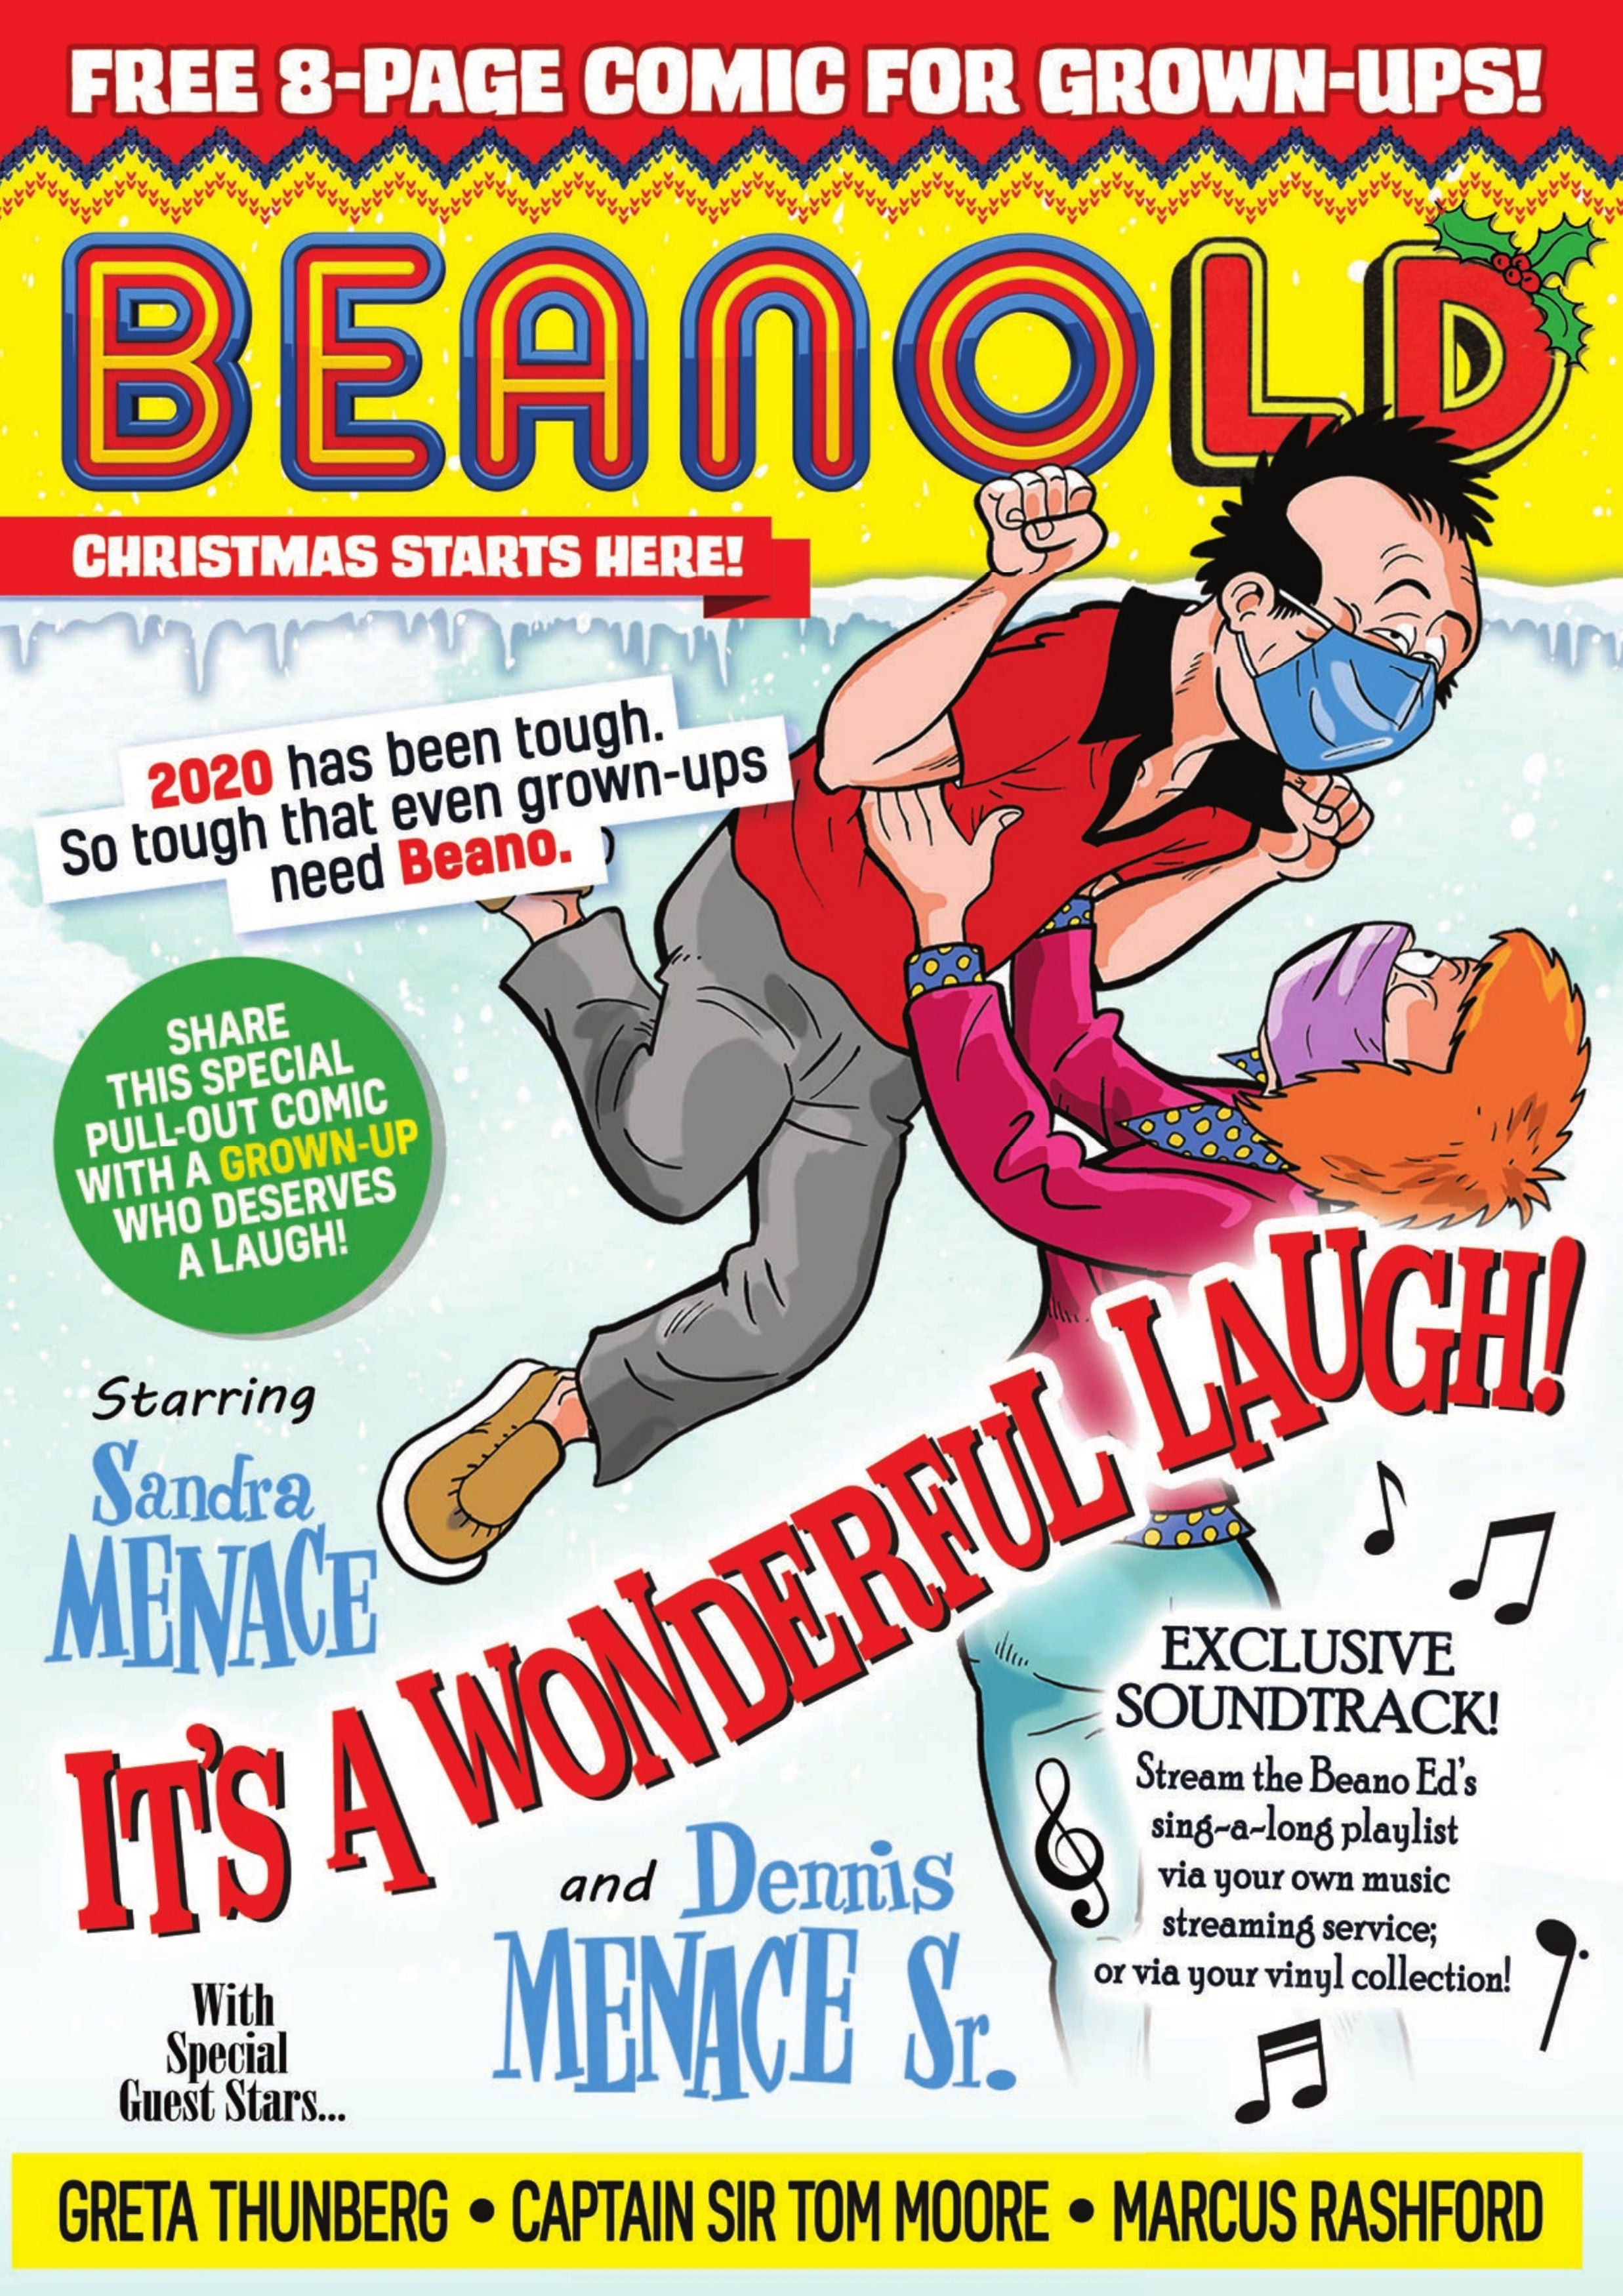 The front page of the BeanOLD, published this week